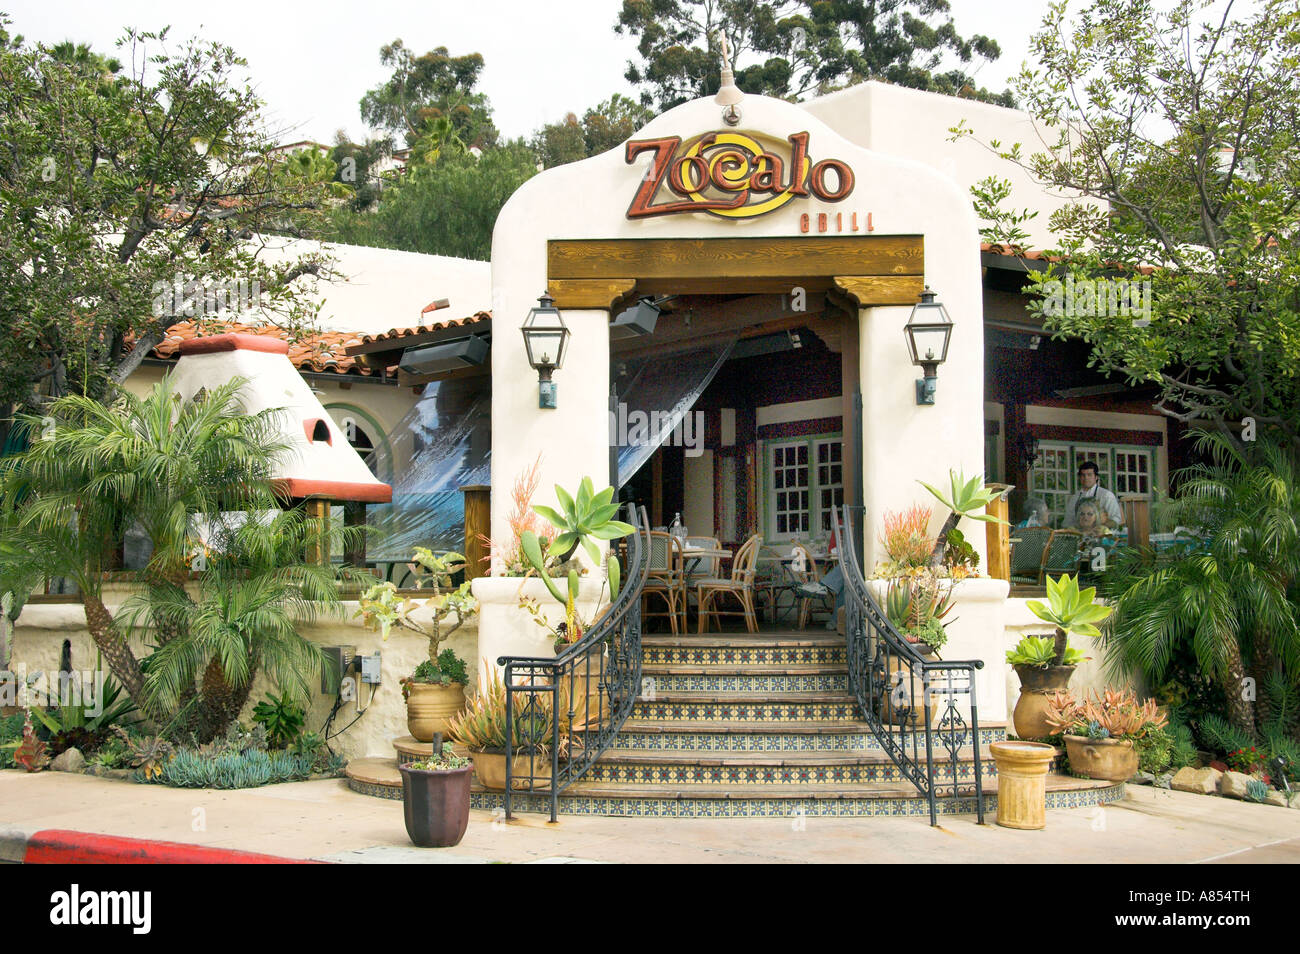 The Zocalo Grill Mexican restaurant in historic Old Town San Diego